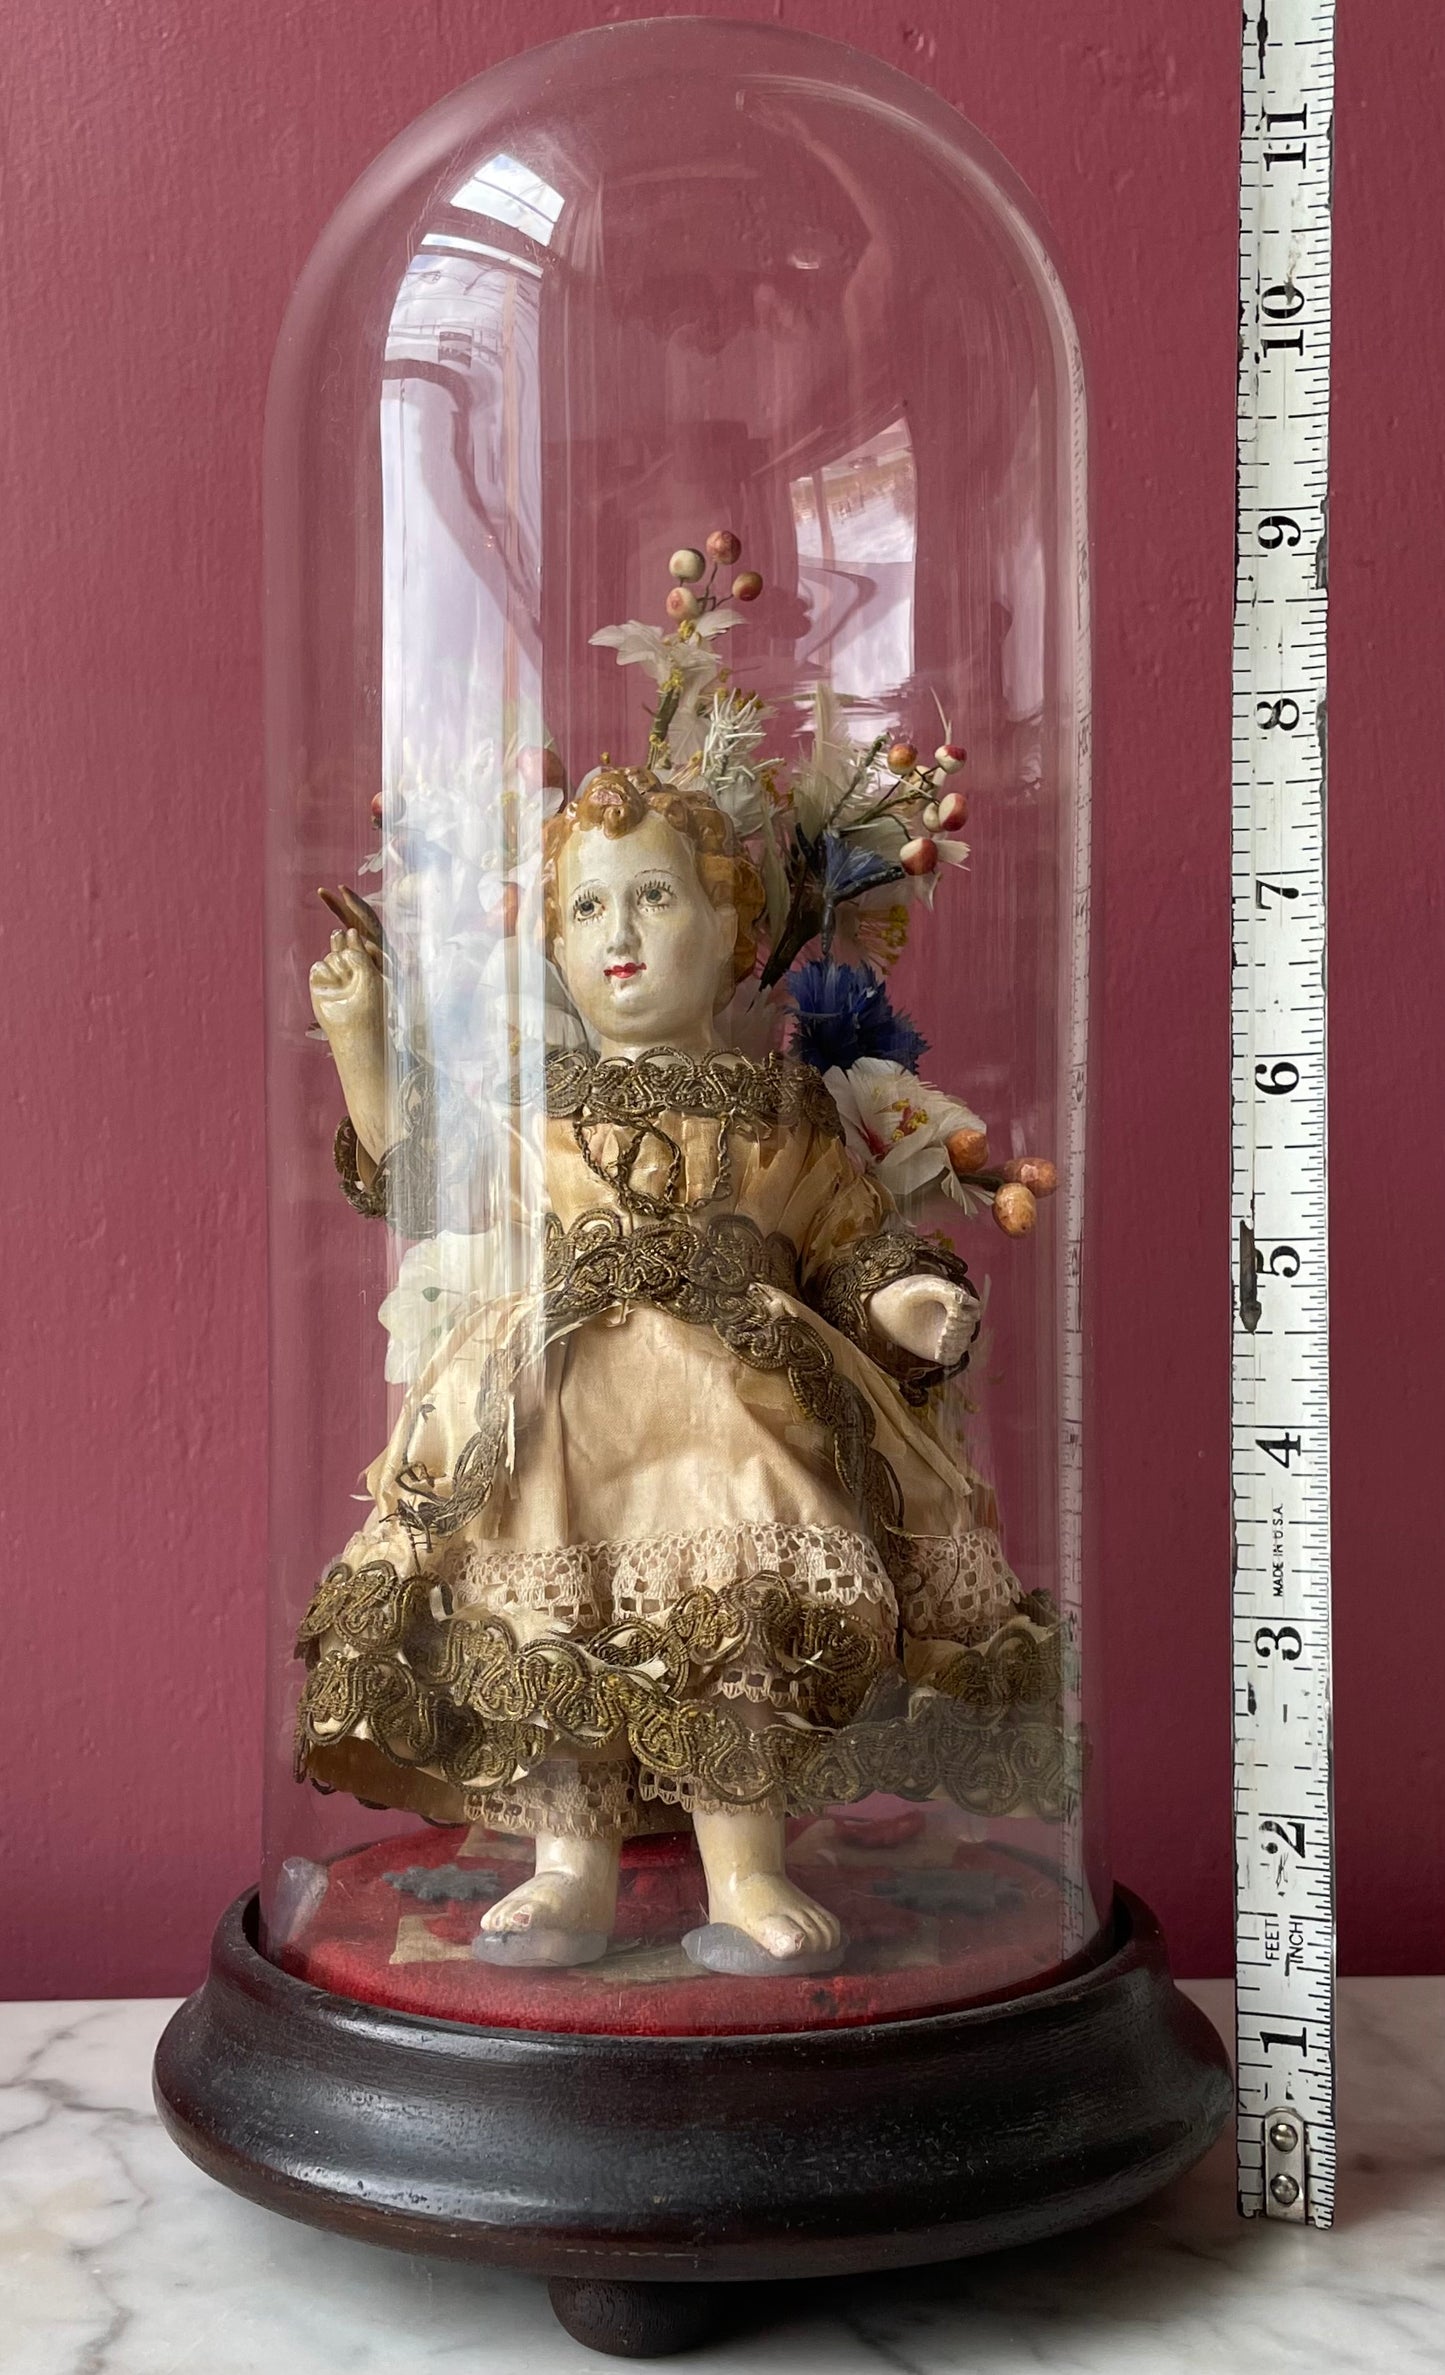 Early 19th Century Christ Child under Domed Glass